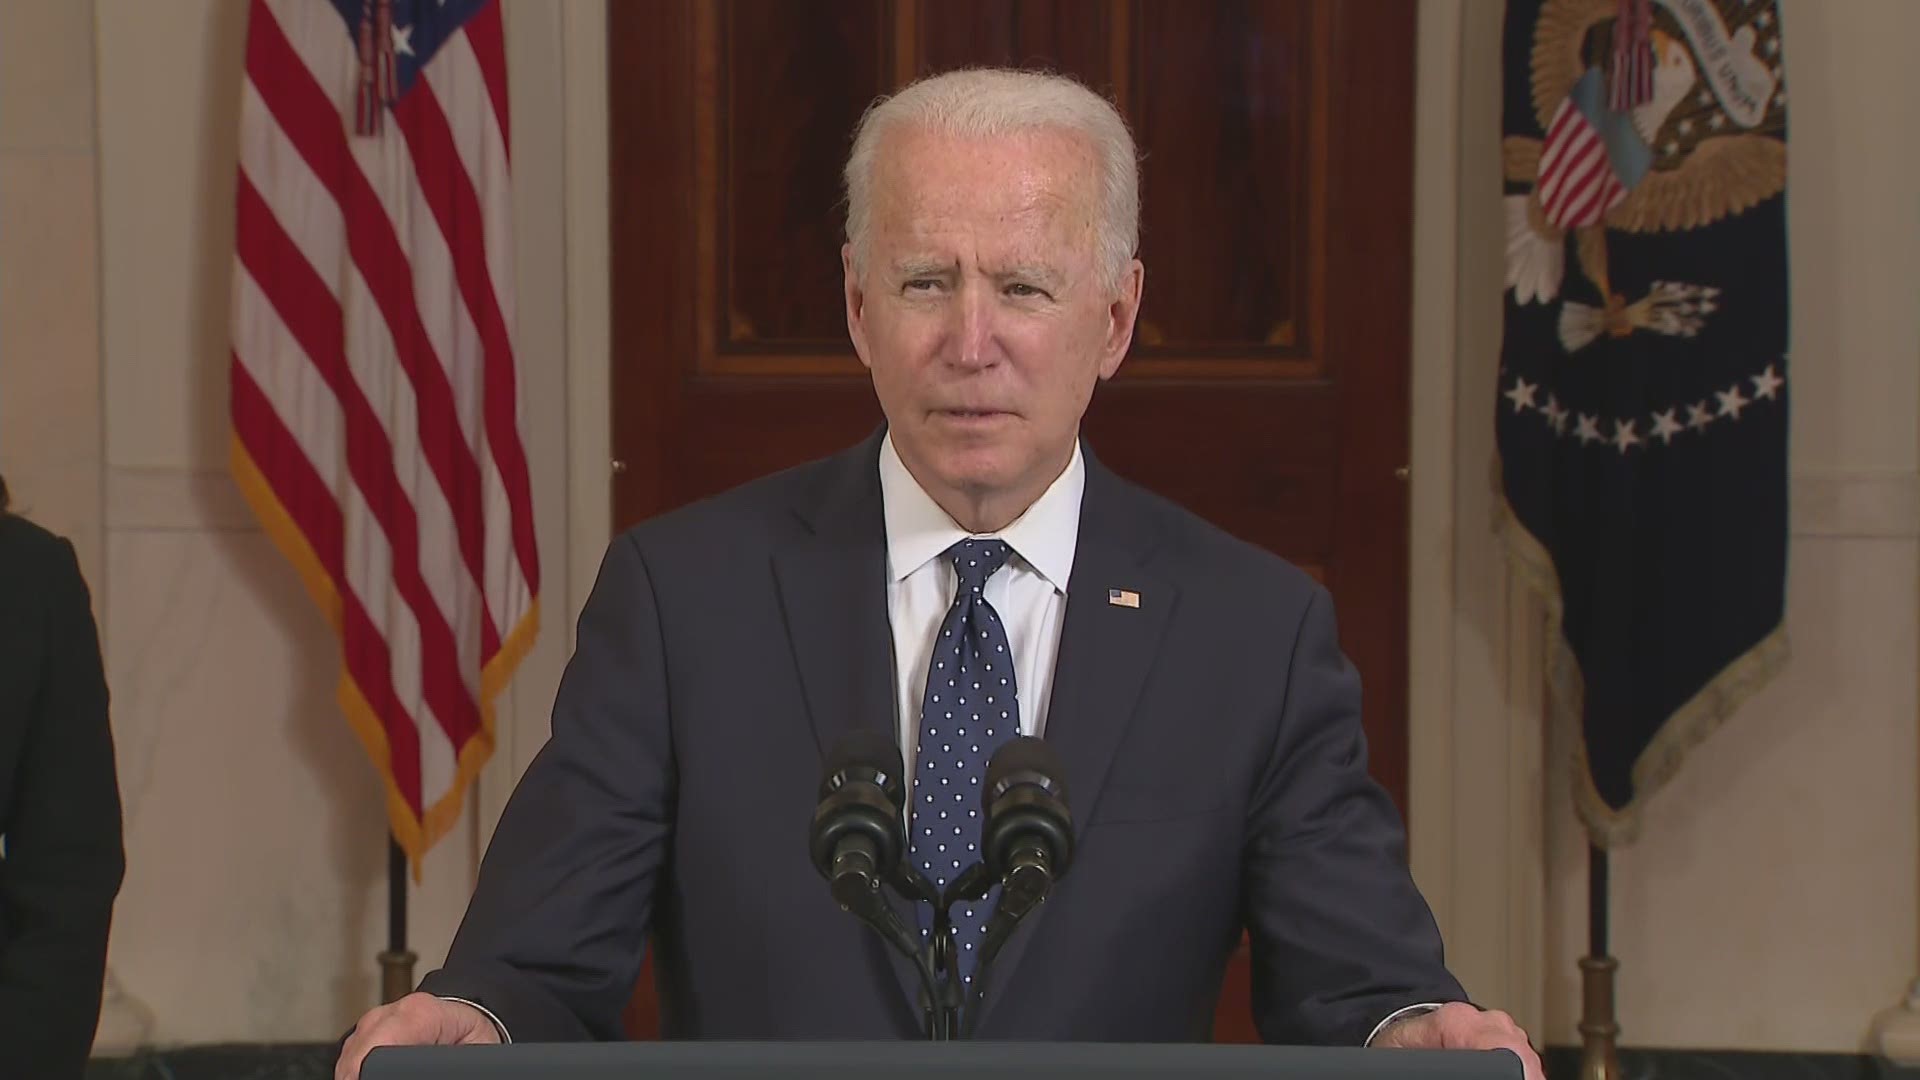 President Joe Biden spoke from the White House after former Minneapolis Police Officer Derek Chauvin was found guilty on all counts in the death of George Floyd.